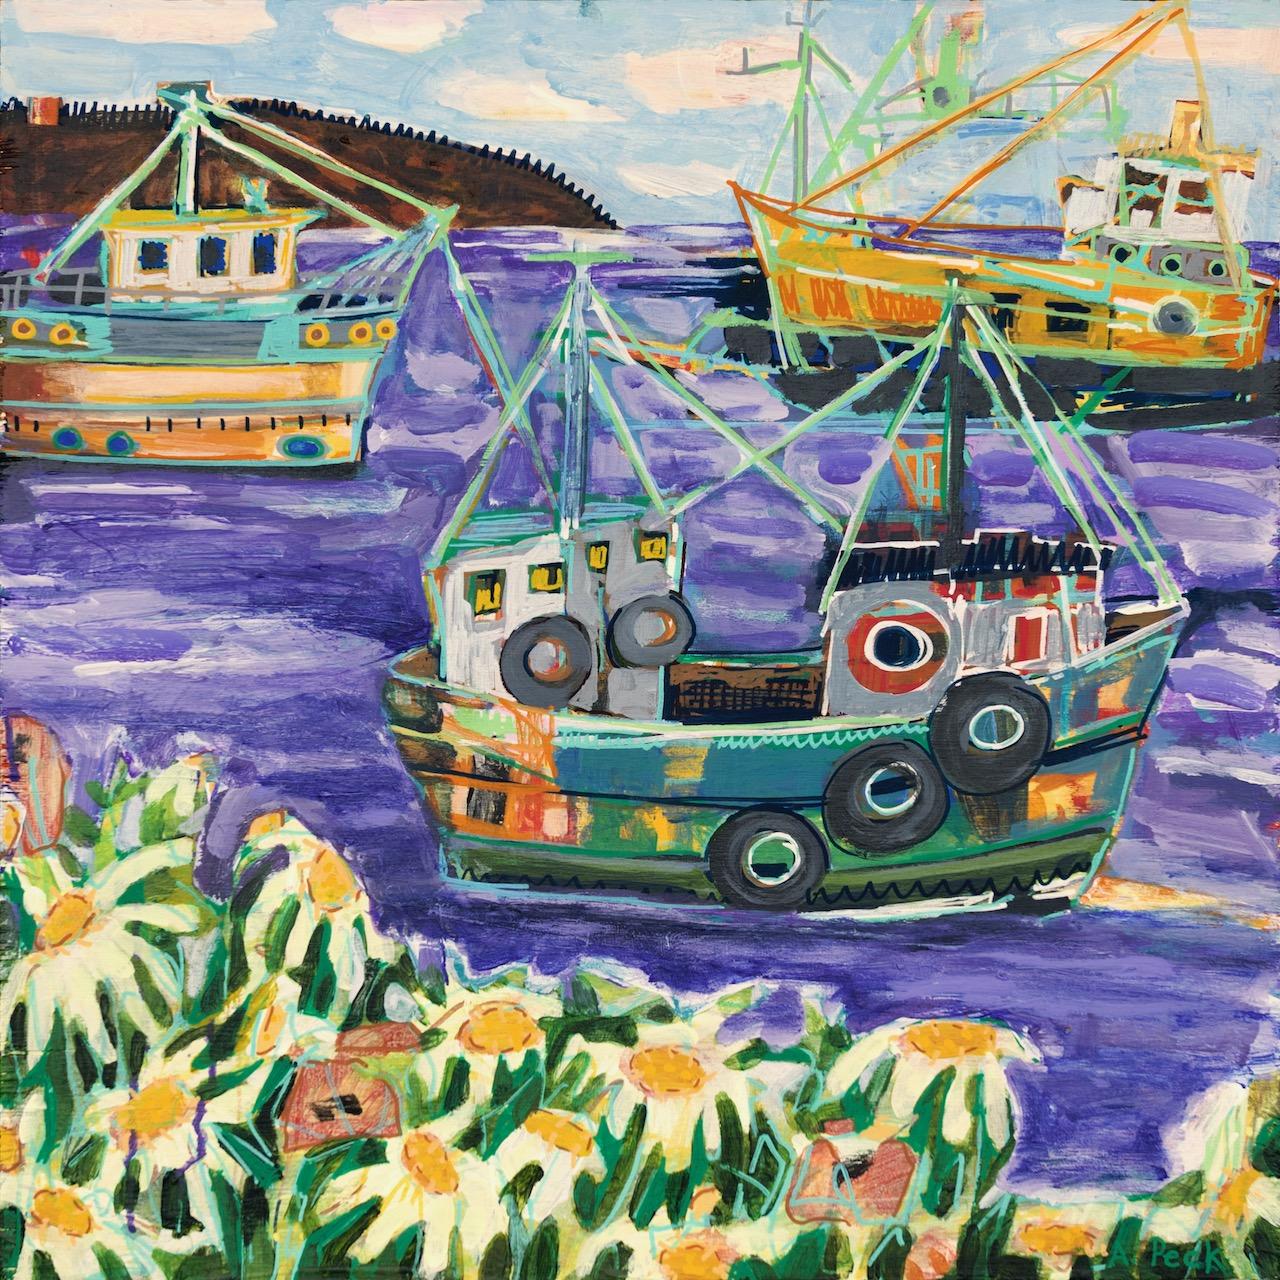 Adair Peck Landscape Painting - "Menemsha Hills" colorful mixed media painting of fishing boats